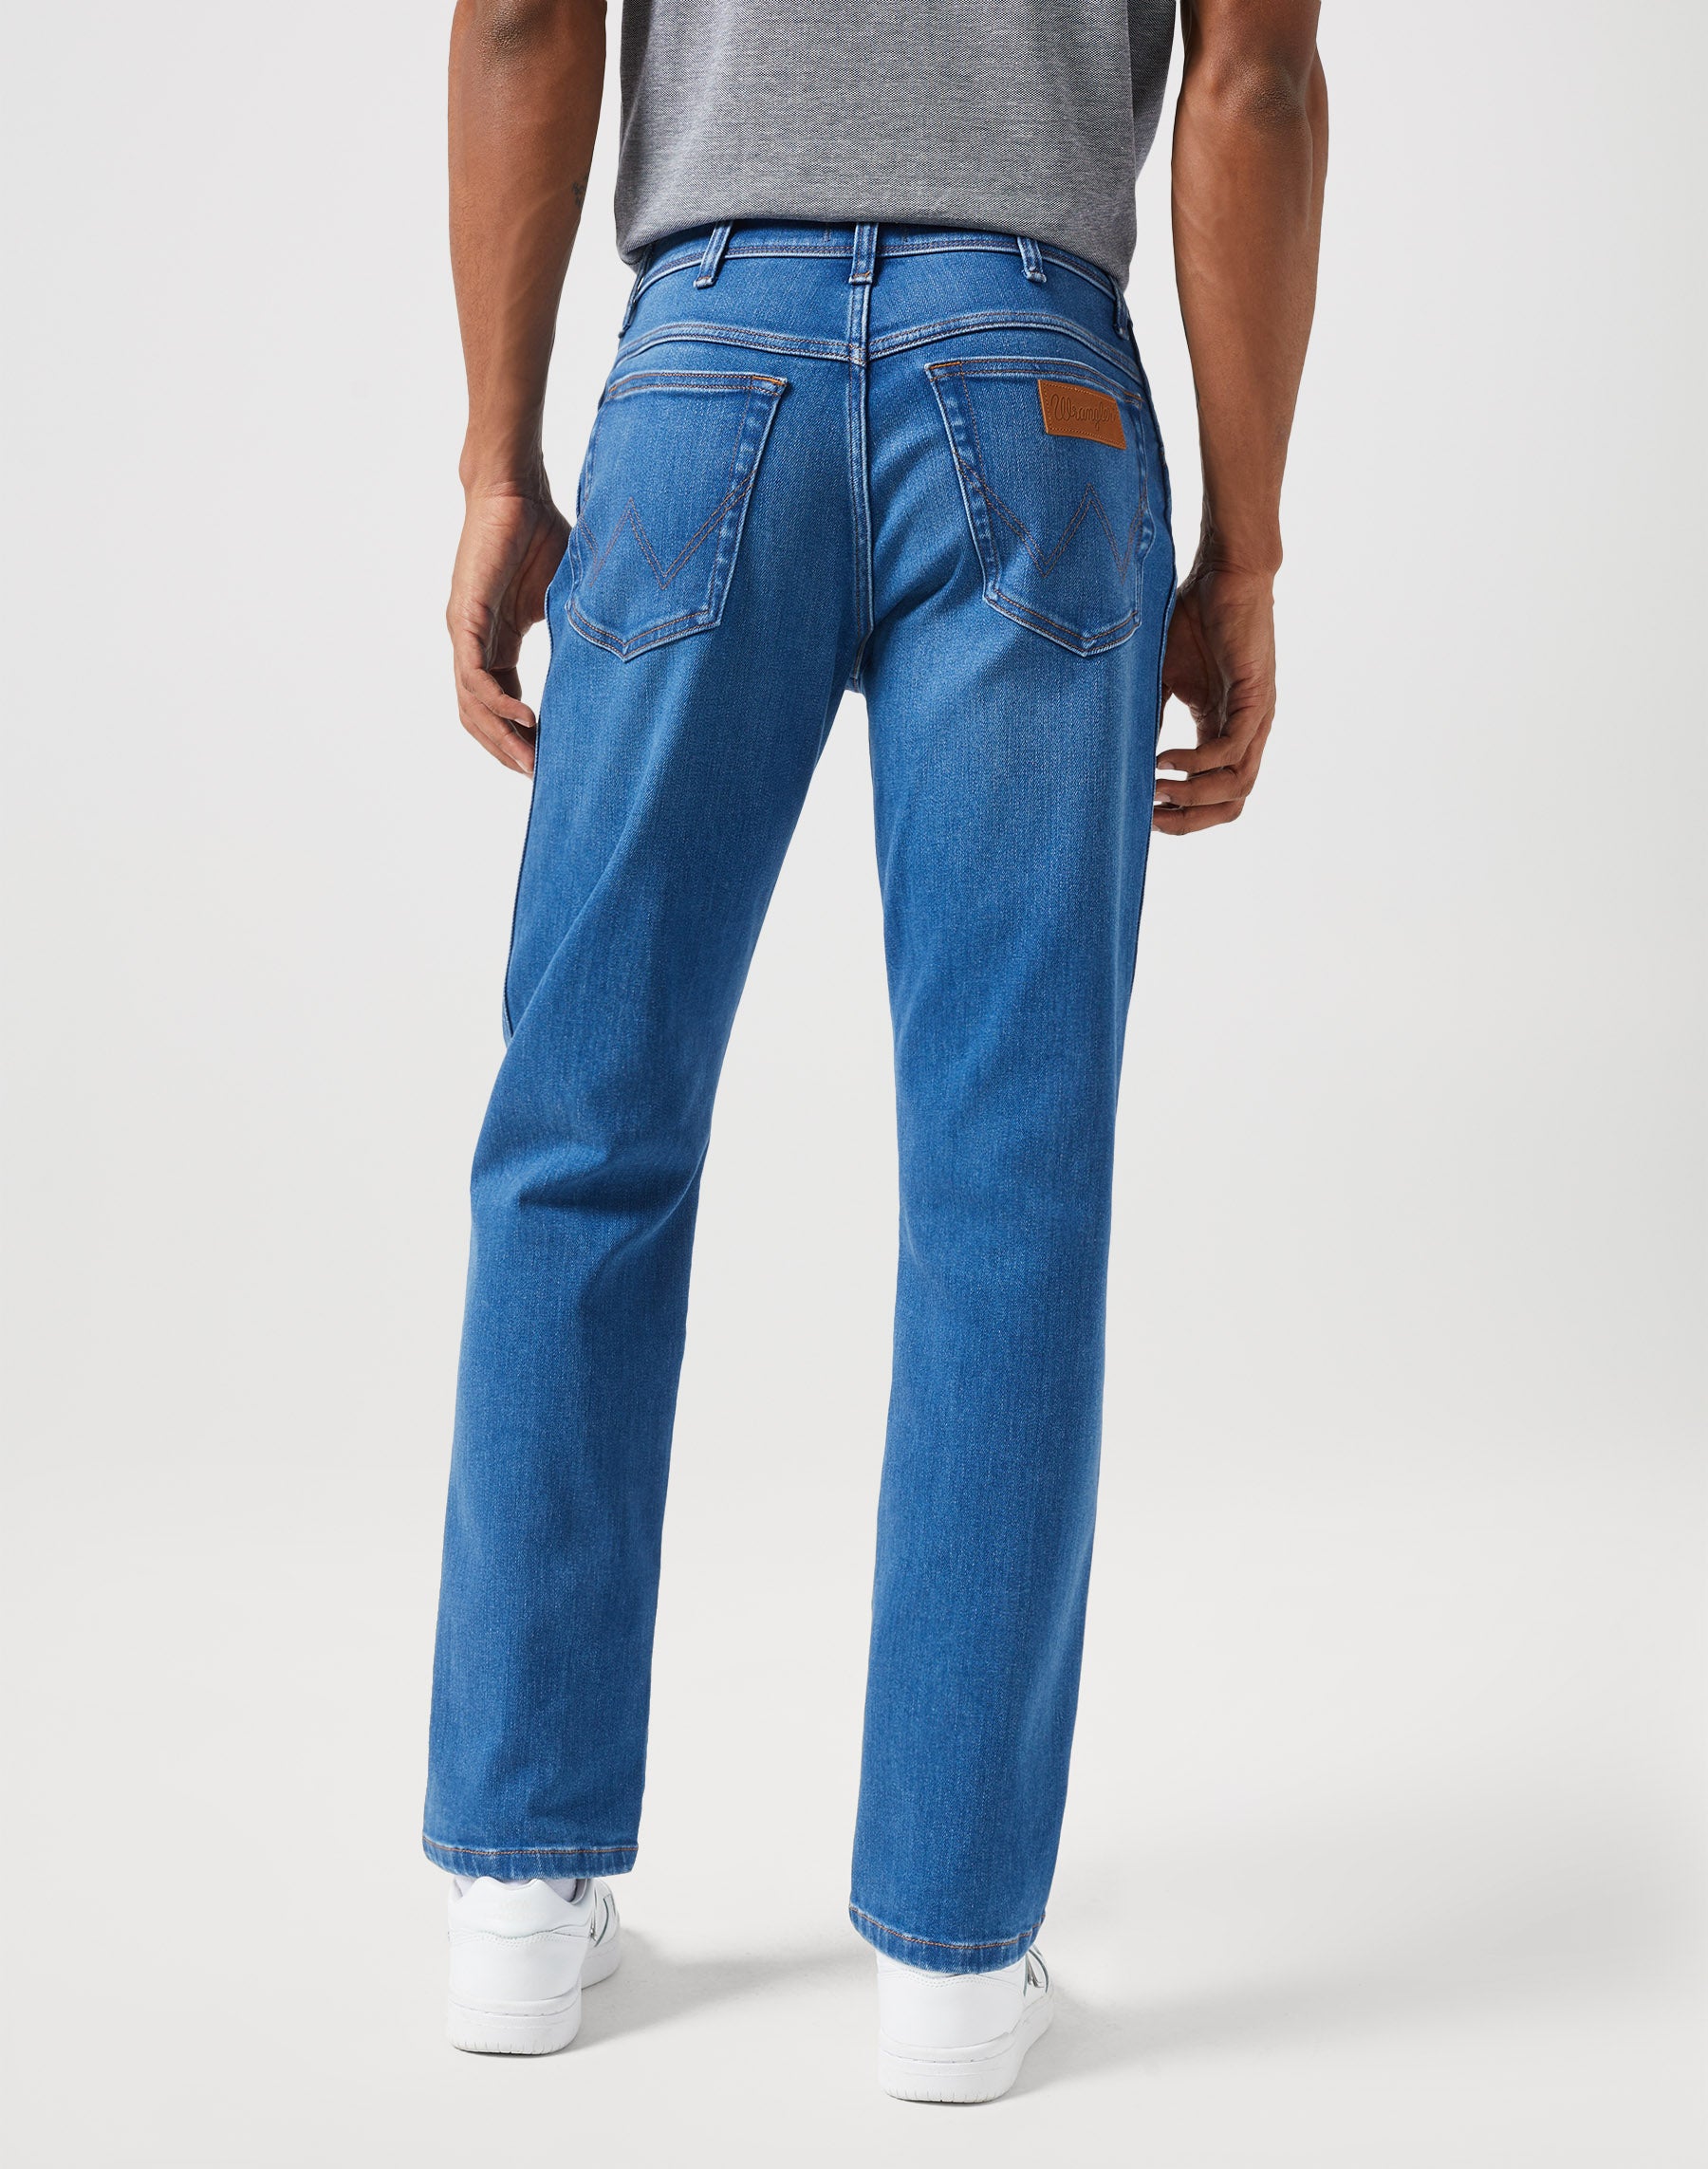 Texas High Stretch in Rustic Jeans Wrangler   